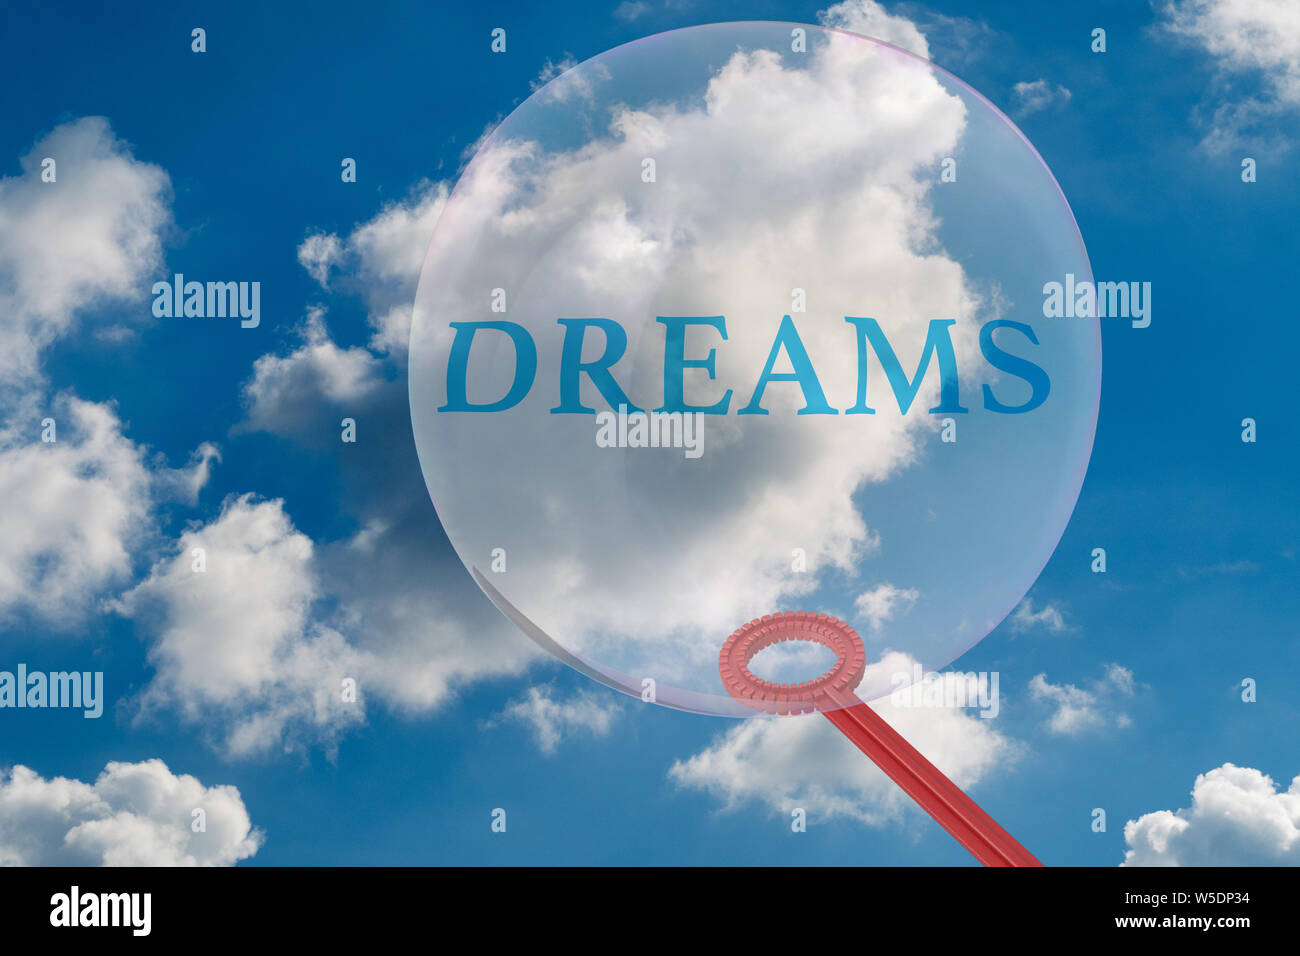 A dream is about to burst, like a soap bubble - 3D-Illustration Stock Photo